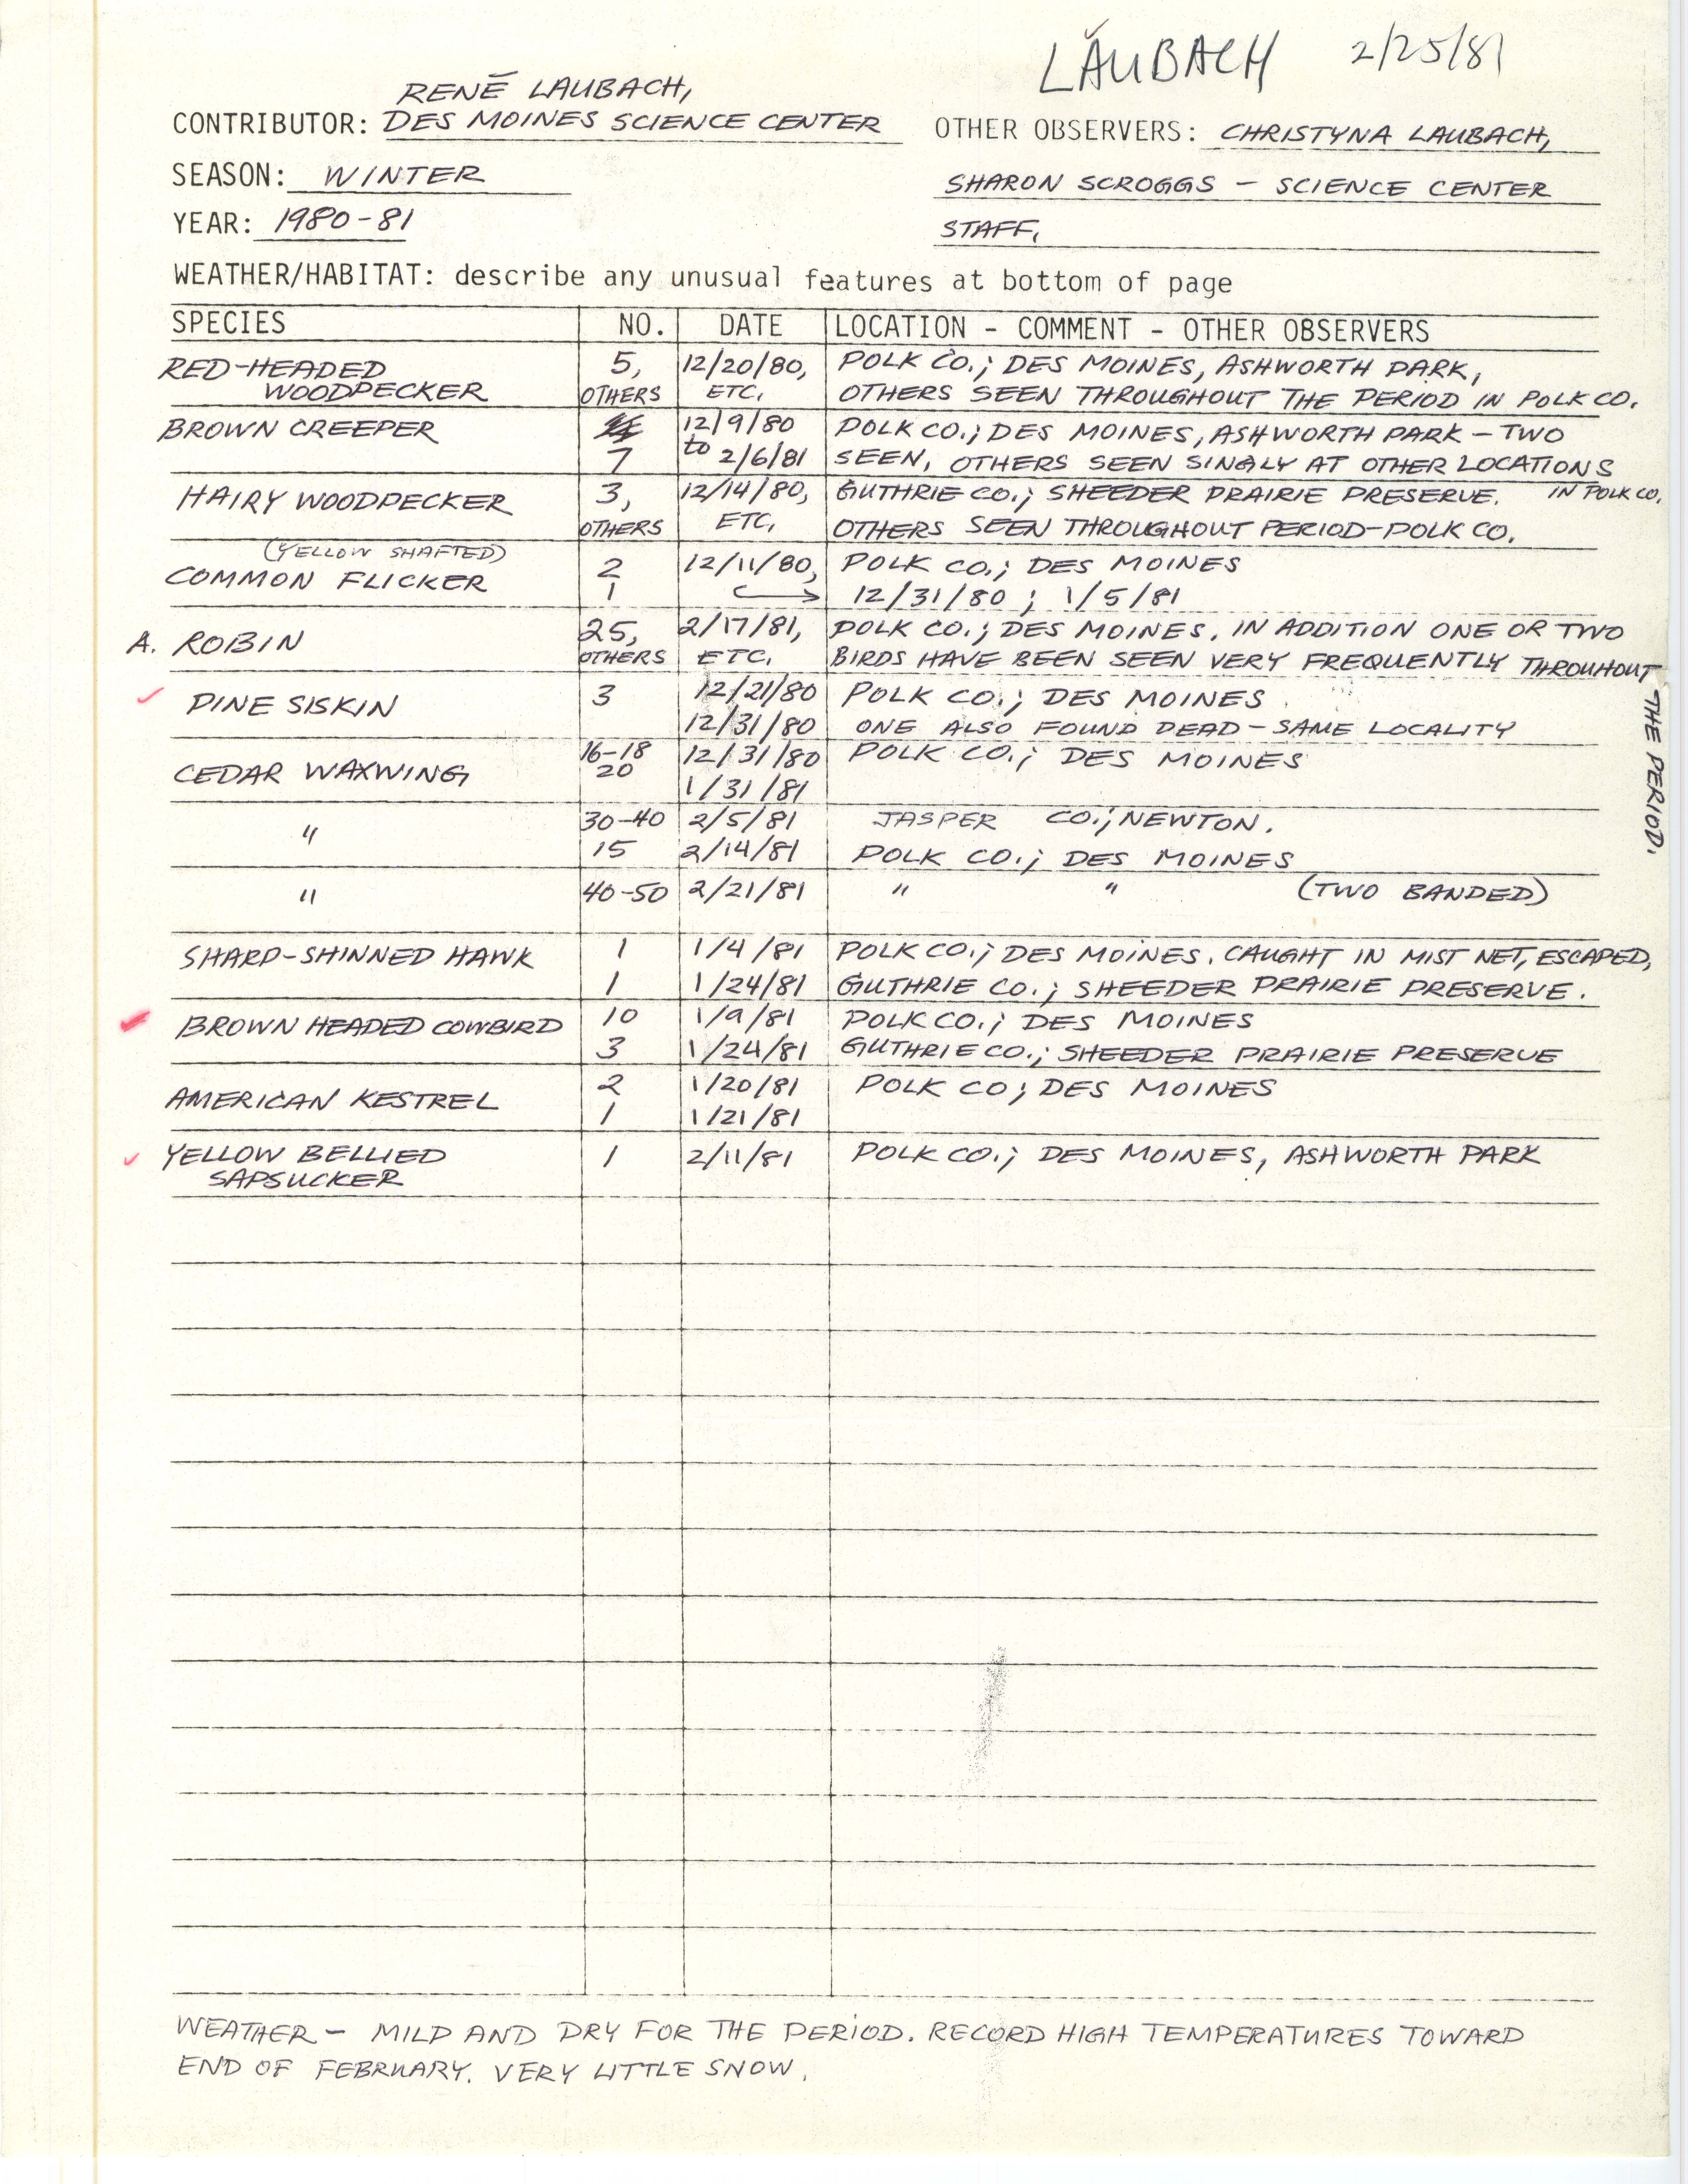 Annotated bird sighting list for winter 1980 and 1981 compiled by Rene Laubach